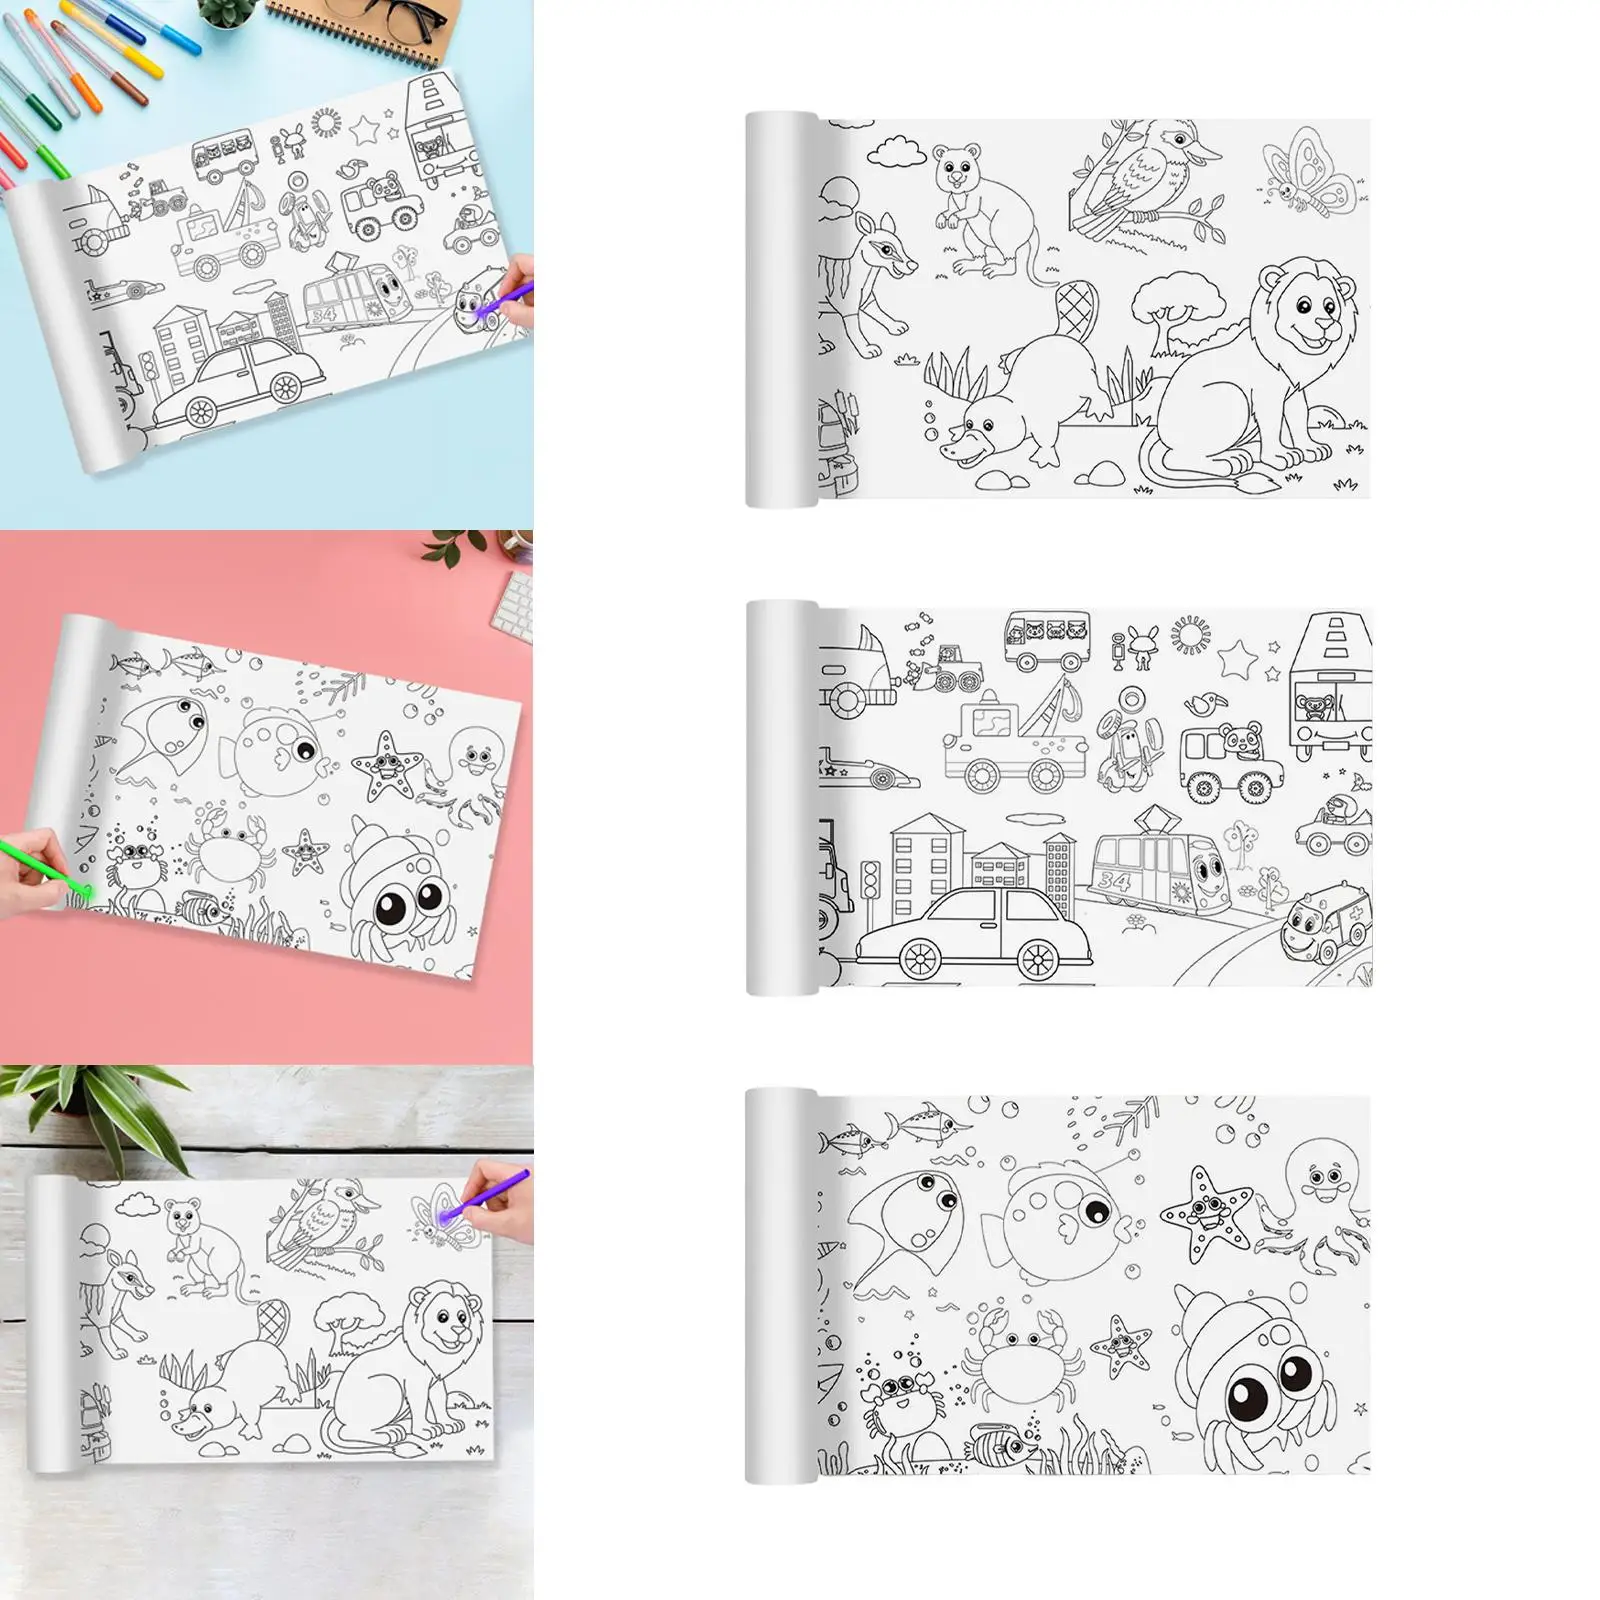 DIY Children Colouring Roll Poster Arts Crafts Activity Wall Sticker Learning and Education Toy Filling Paper for Toddlers